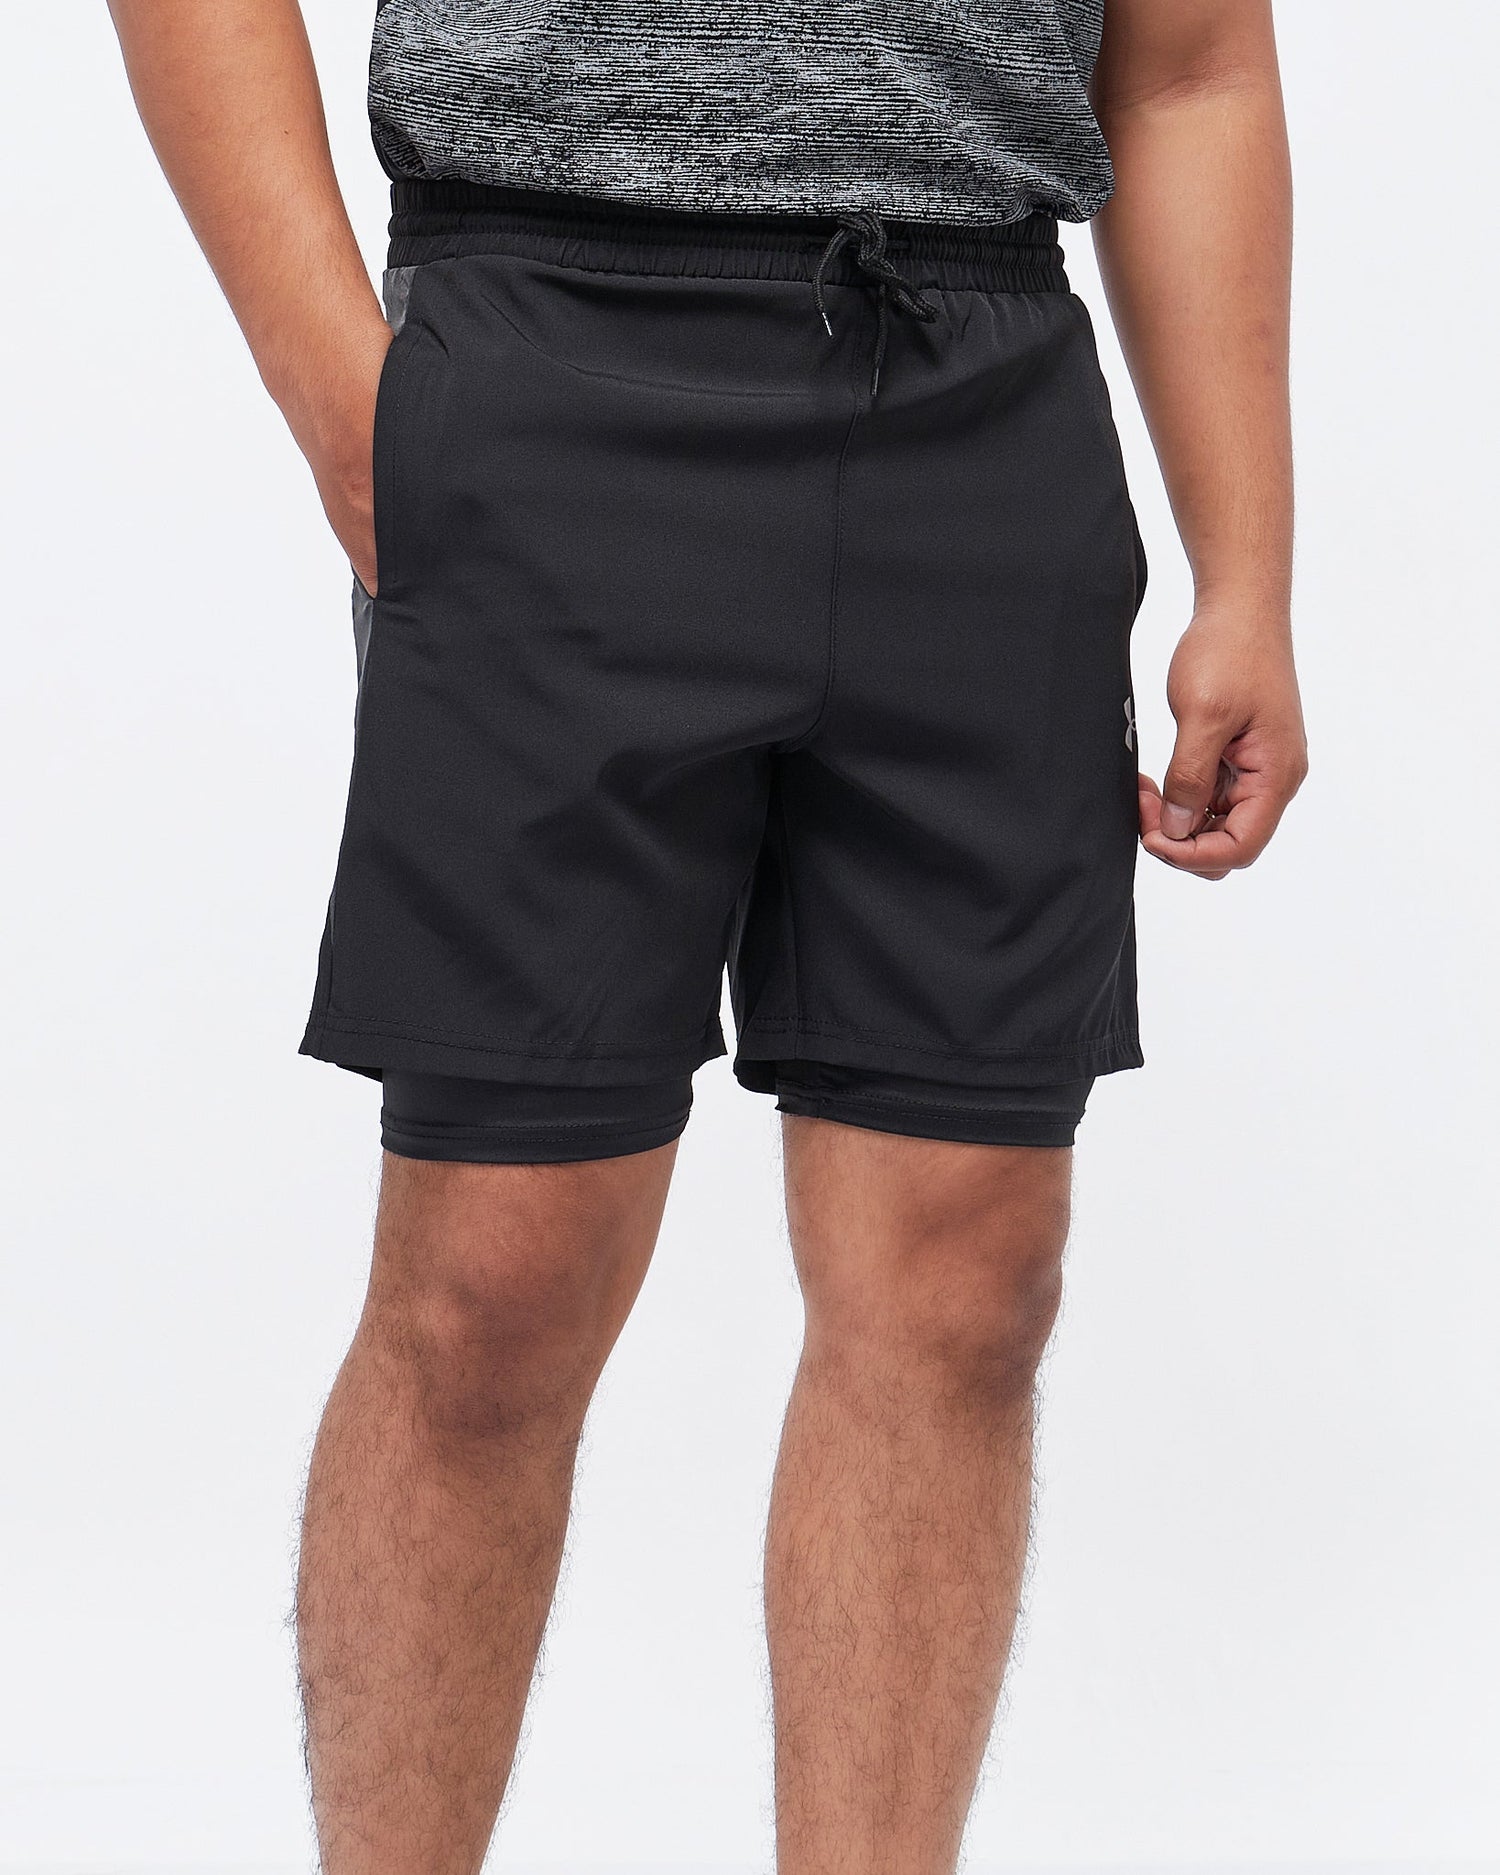 MOI OUTFIT-Side Color Block 2 in 1 Men Sport Shorts 13.90